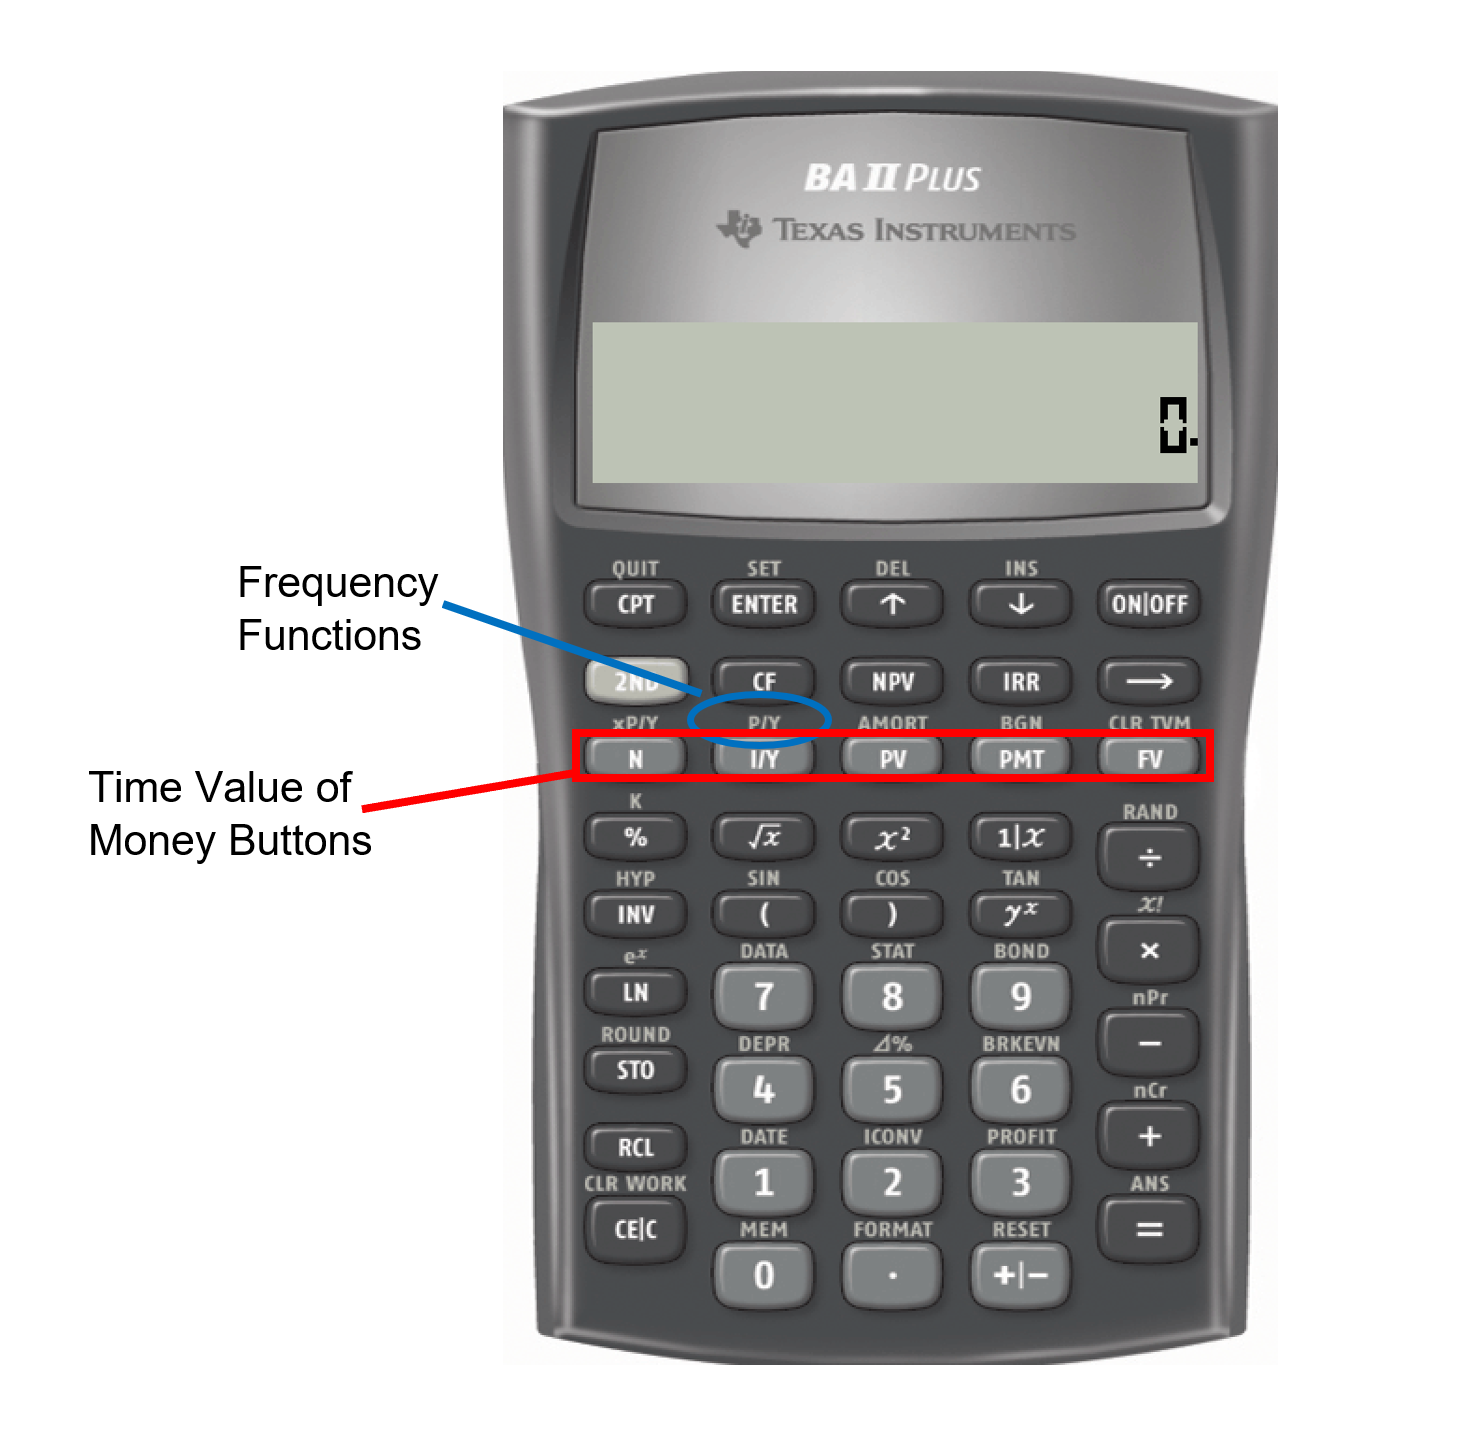 Picture of the BAII Plus calculator showing the Frequency Functions and the Time Value of Money Buttons.